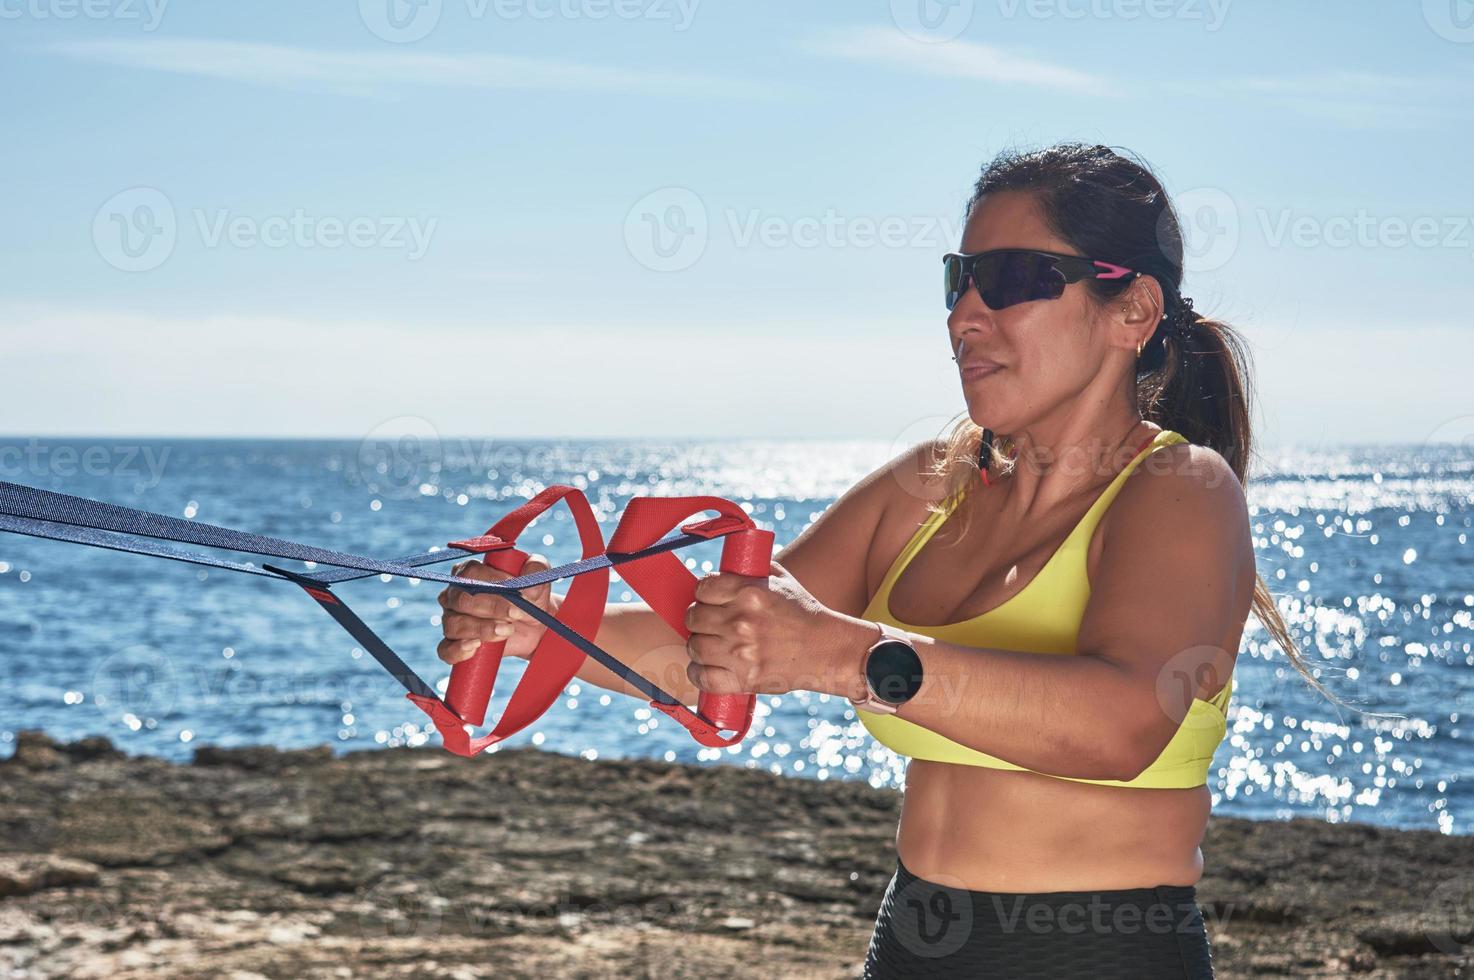 Latin woman, middle-aged, looking at app, smart watch, resting after gym session, wearing yellow top, black leggings, dumbbell, burning calories, staying fit, outdoors by the sea, photo